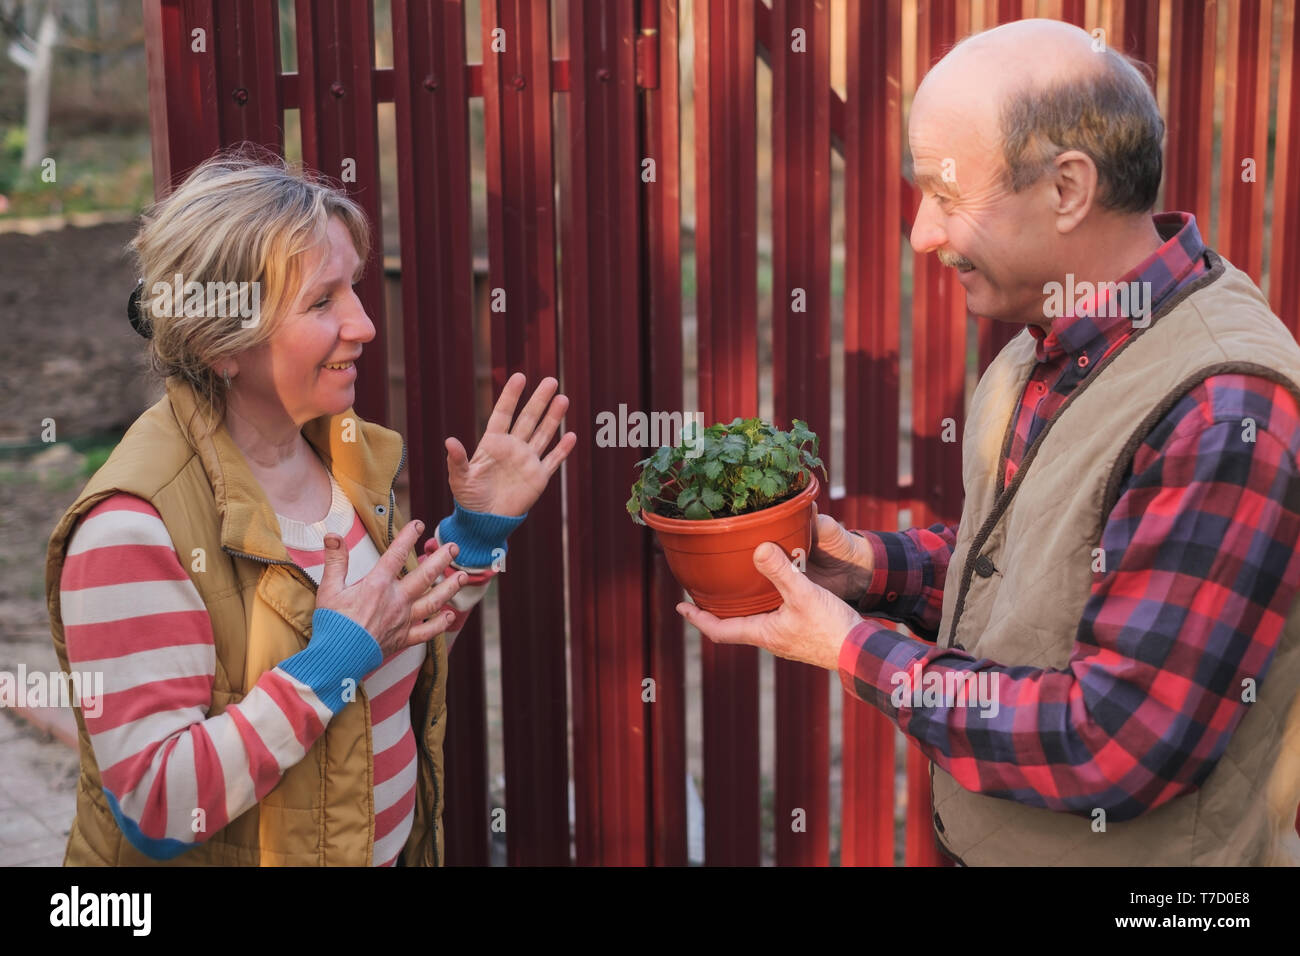 Two neighbors man and woman looking on new plant in pot. Stock Photo